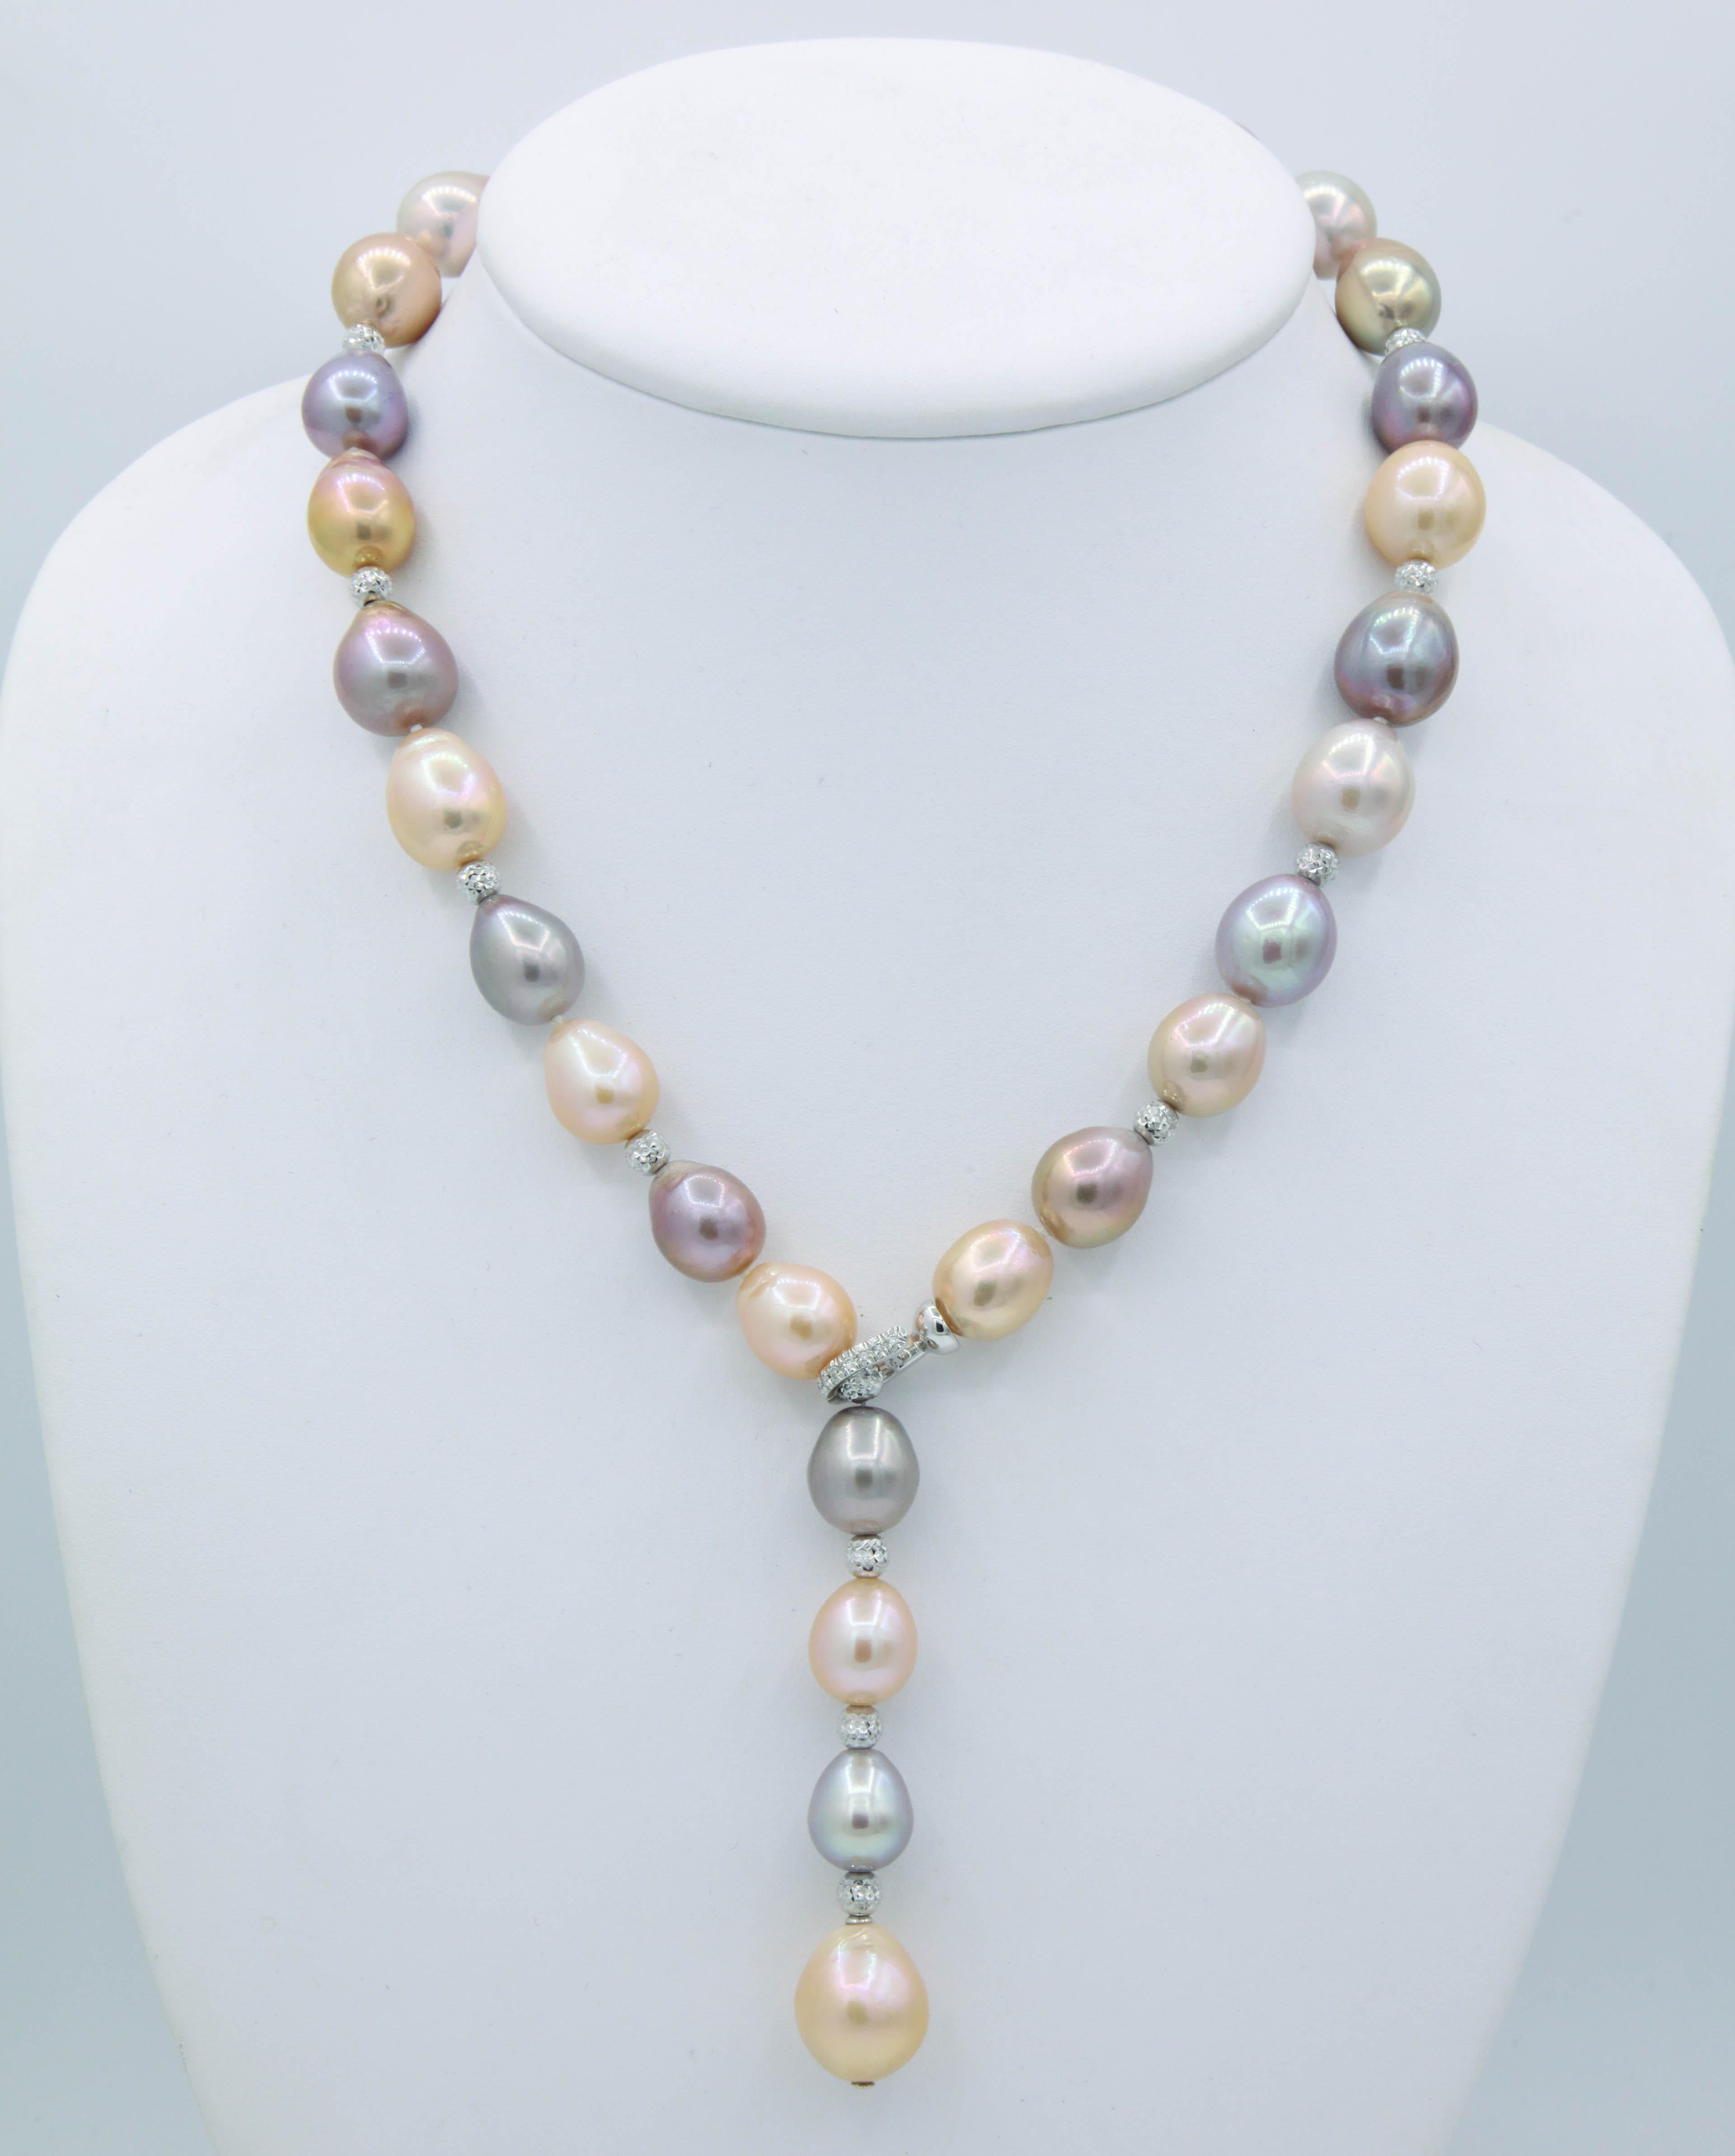 Freshwater cultured pearl 11.5 mm - 14.0 mm  peach , pink and purple color
30 Pearls
18K white gold cut like Diamond cut to give that special diamond effect.
20